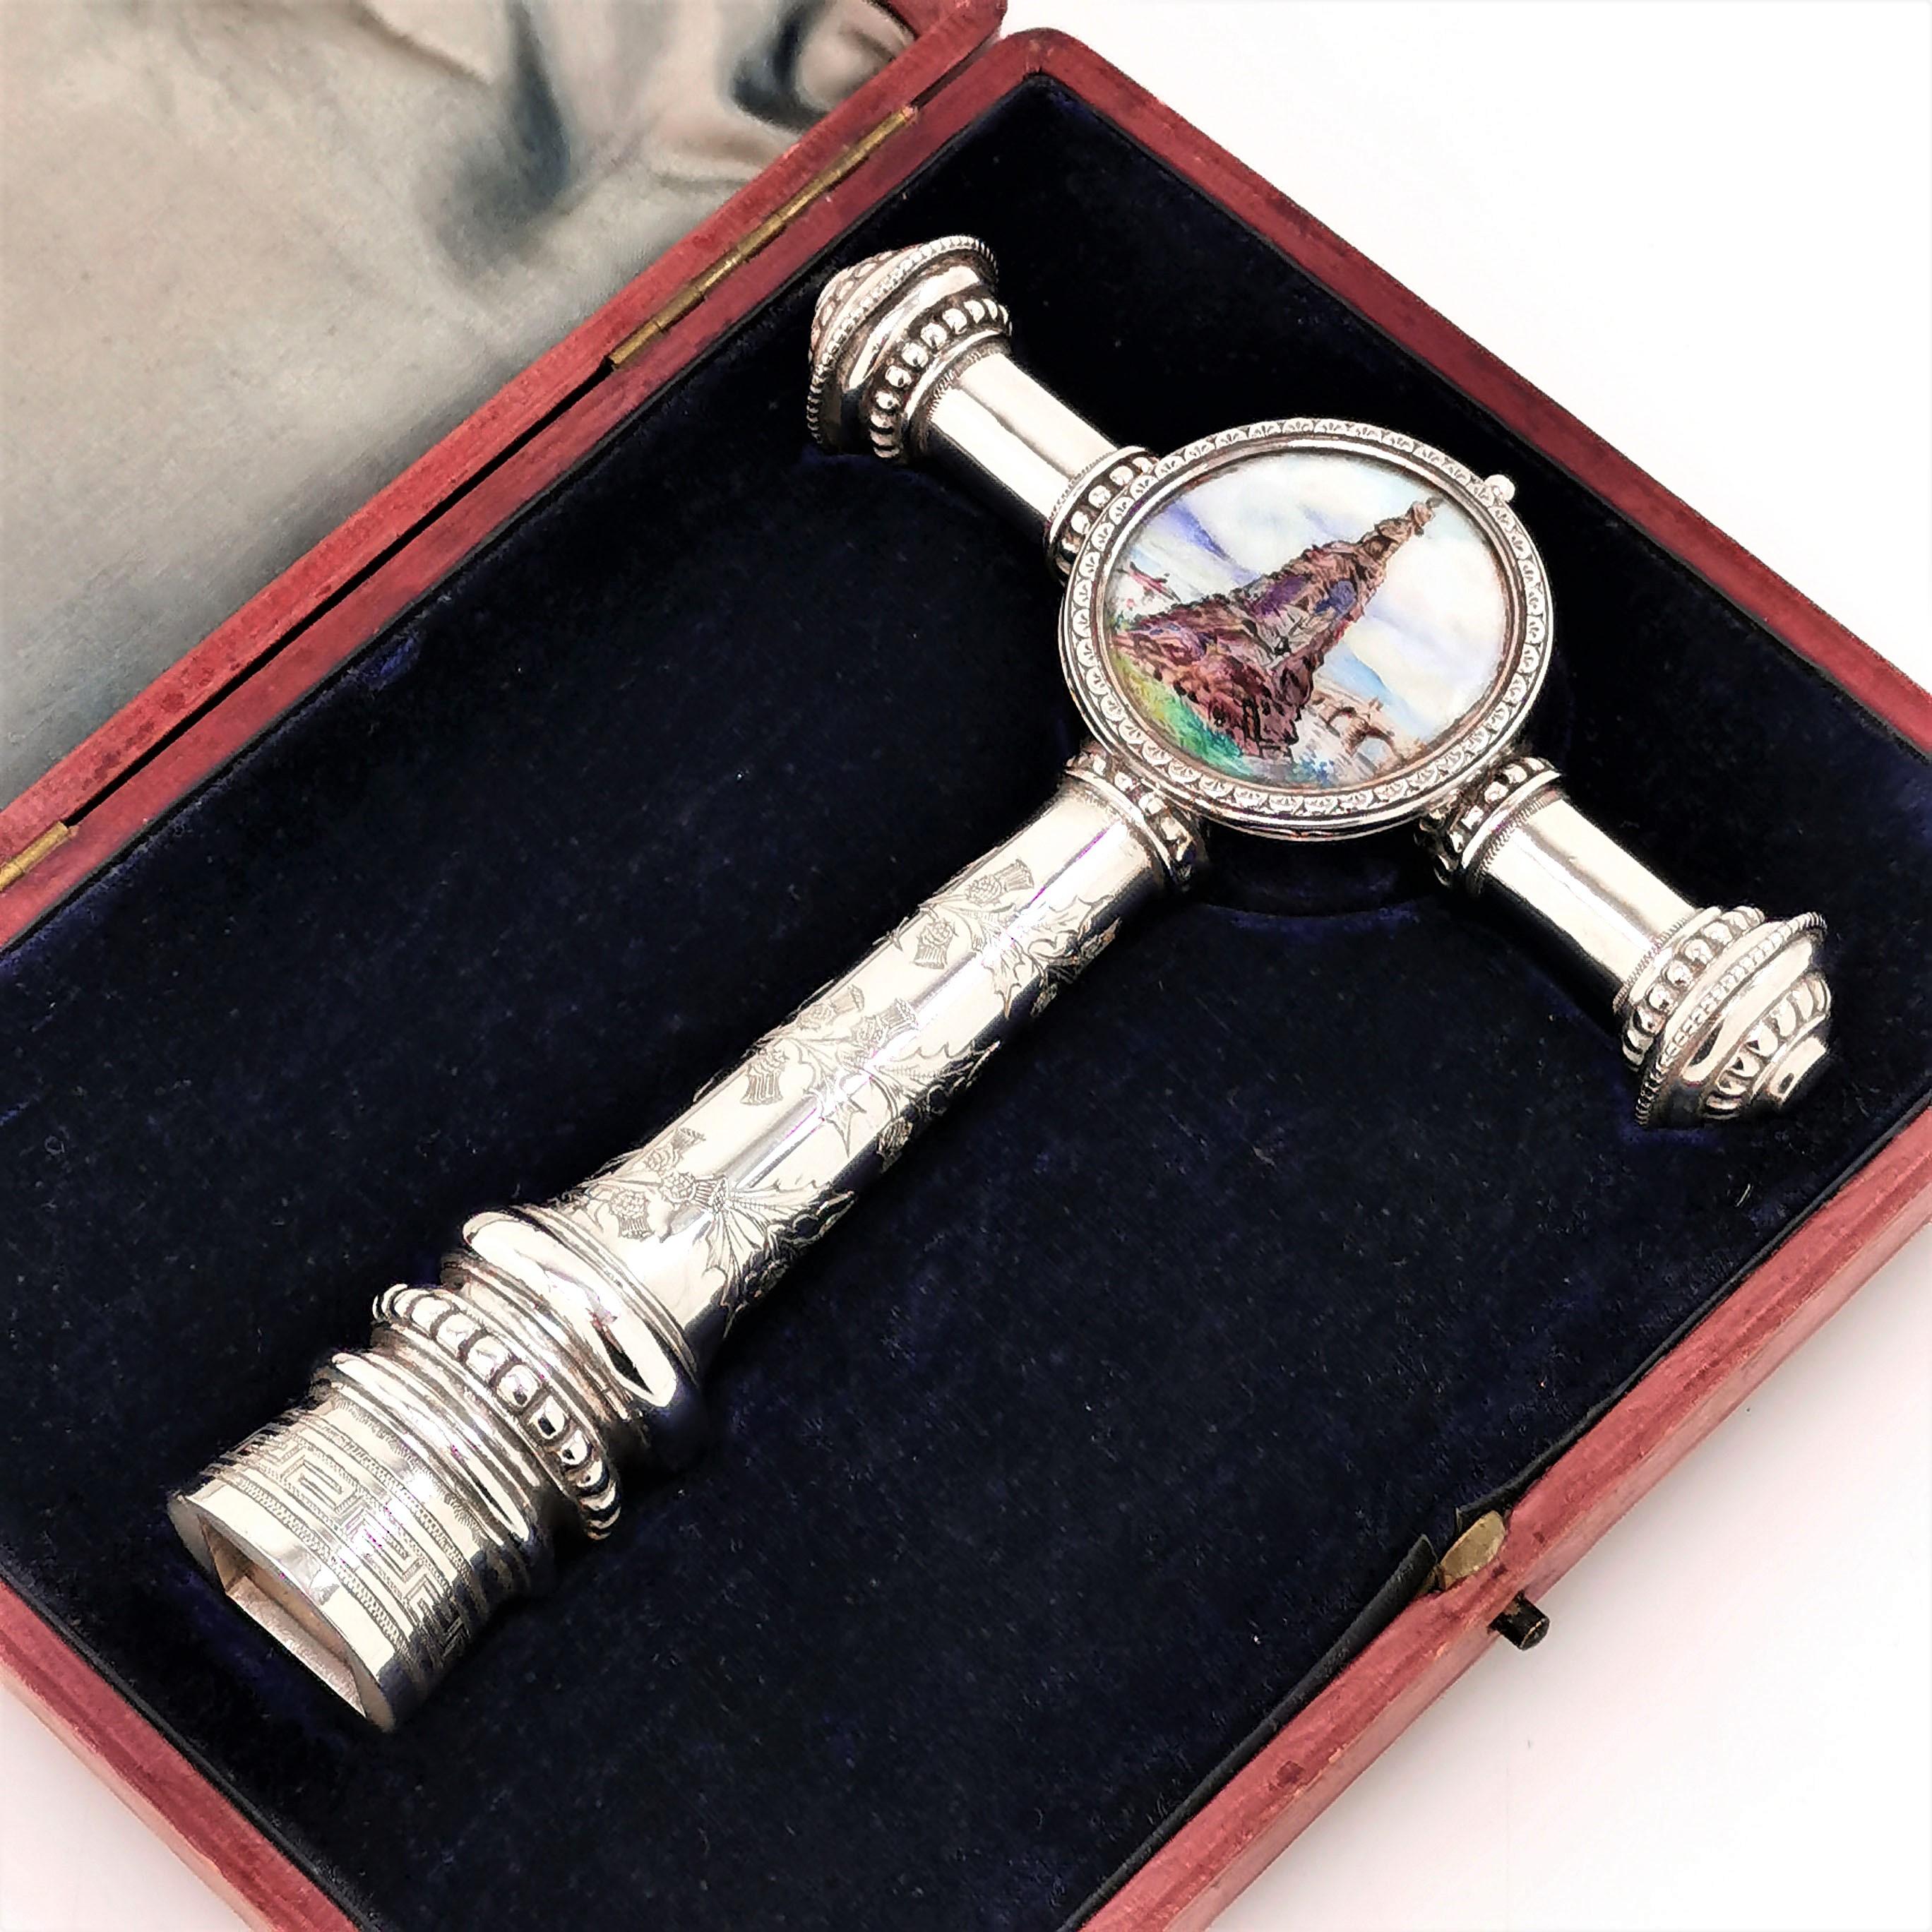 A wonderful, unusual Antique Silver Presentation Key with Enamel Detailing presented in its original fitted case. The Enamelled Cartouche shows a classical figure on top of a rock base. The back ground shows a river with a rower and a bridge.

The